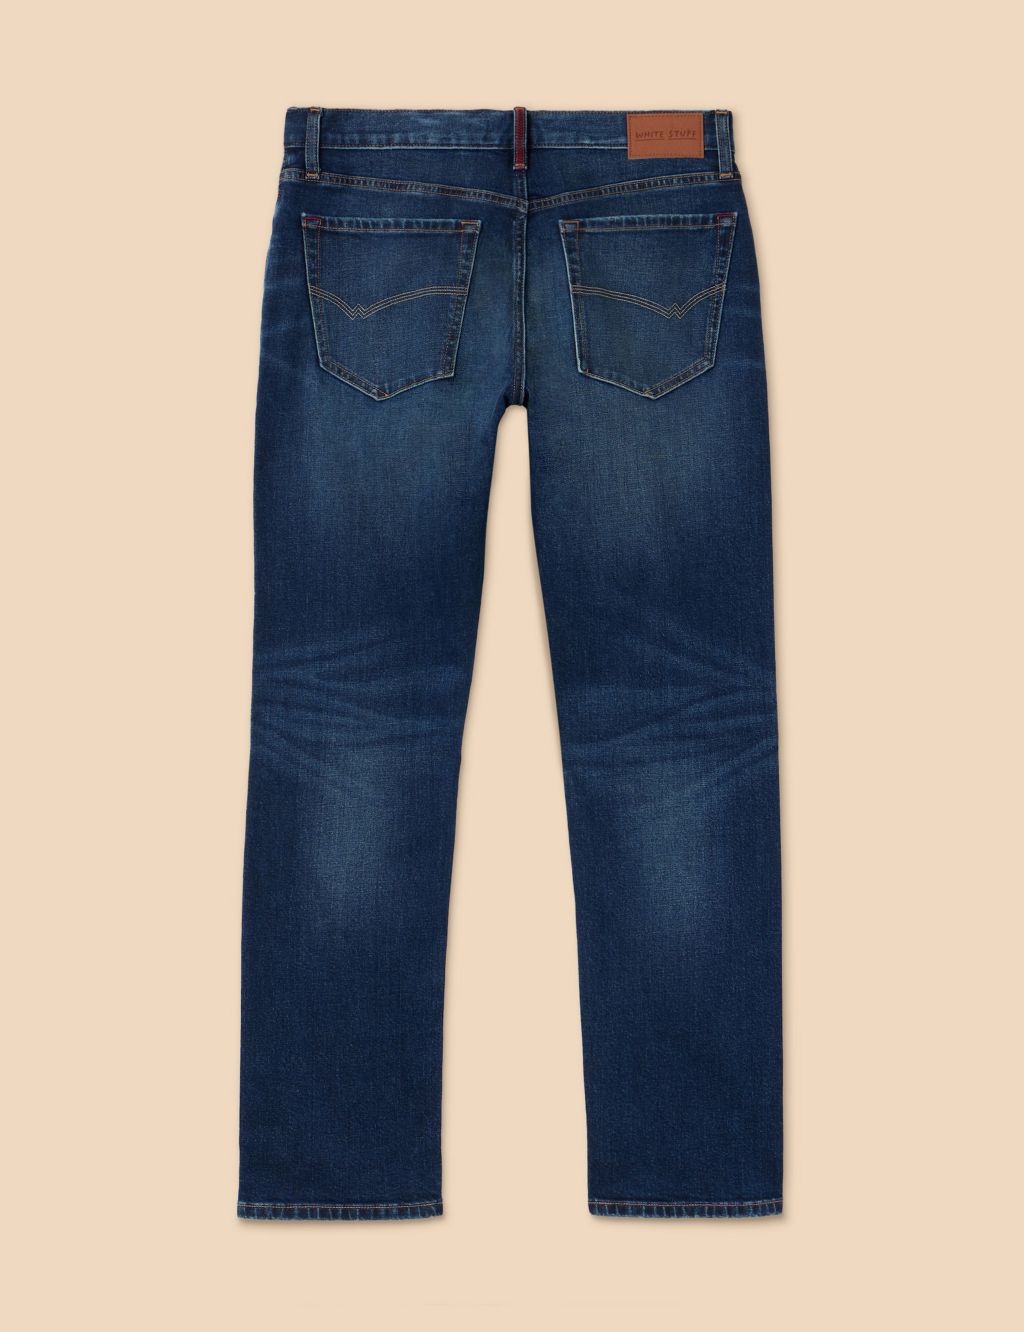 Straight Fit 5 Pocket Jeans image 6